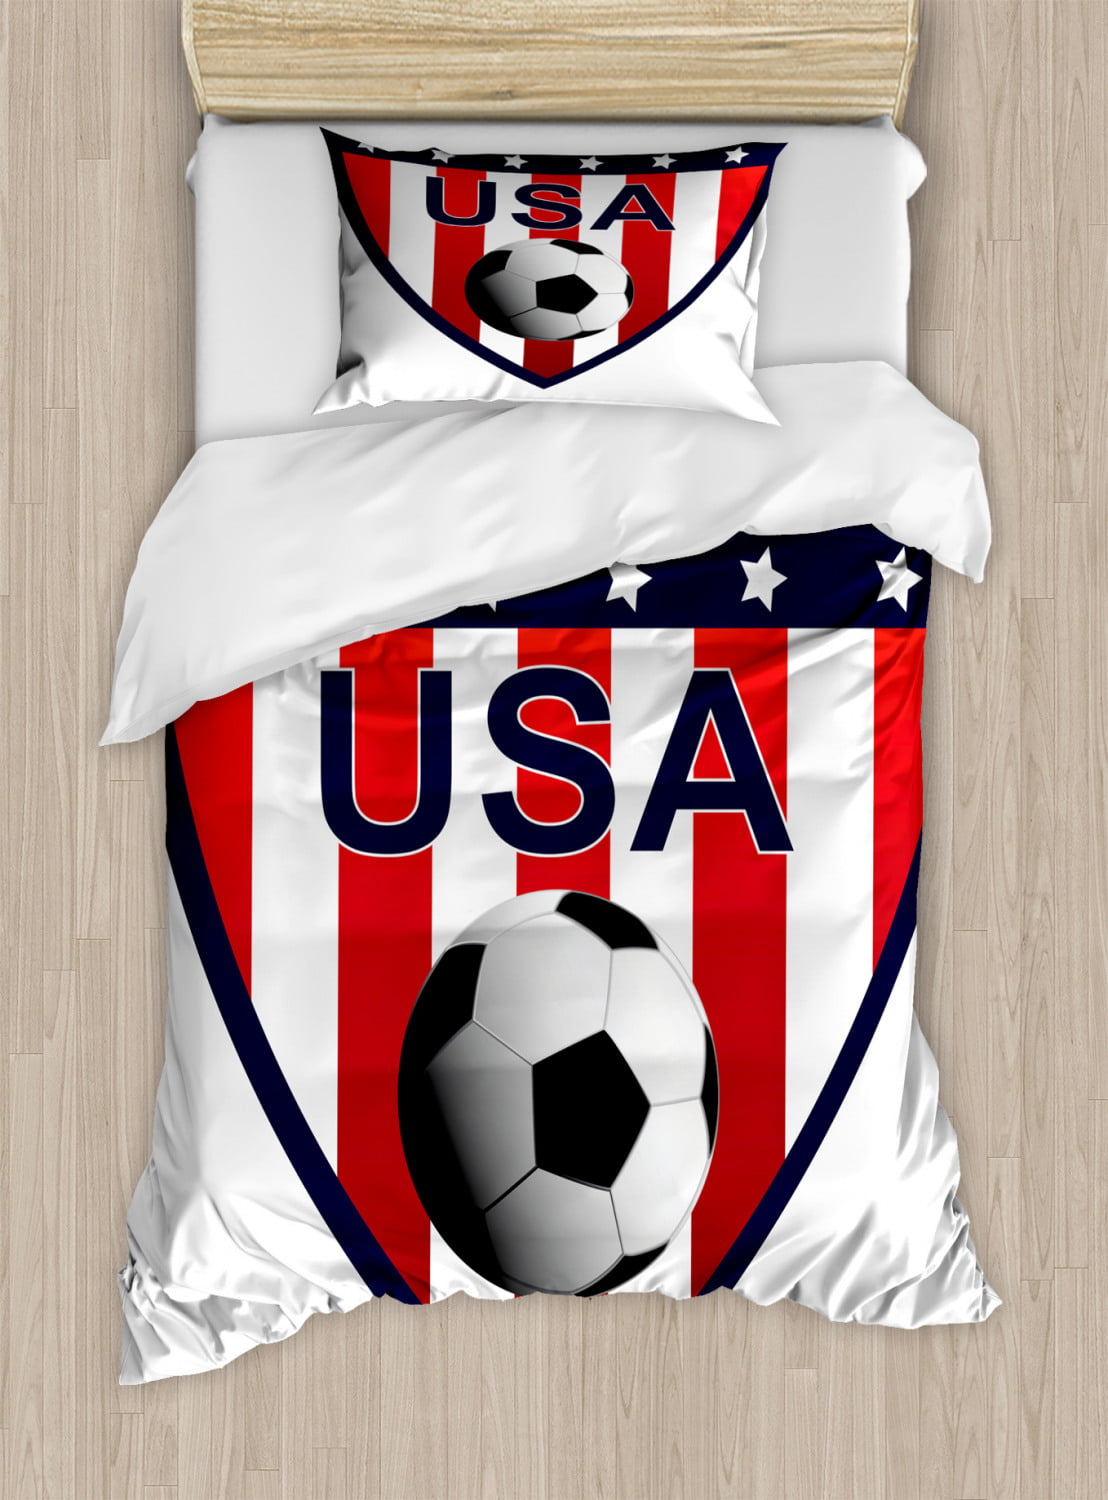 Handmade New 30x20 Soccer Theme Multi color Standard or Queen USA Cotton Blend 